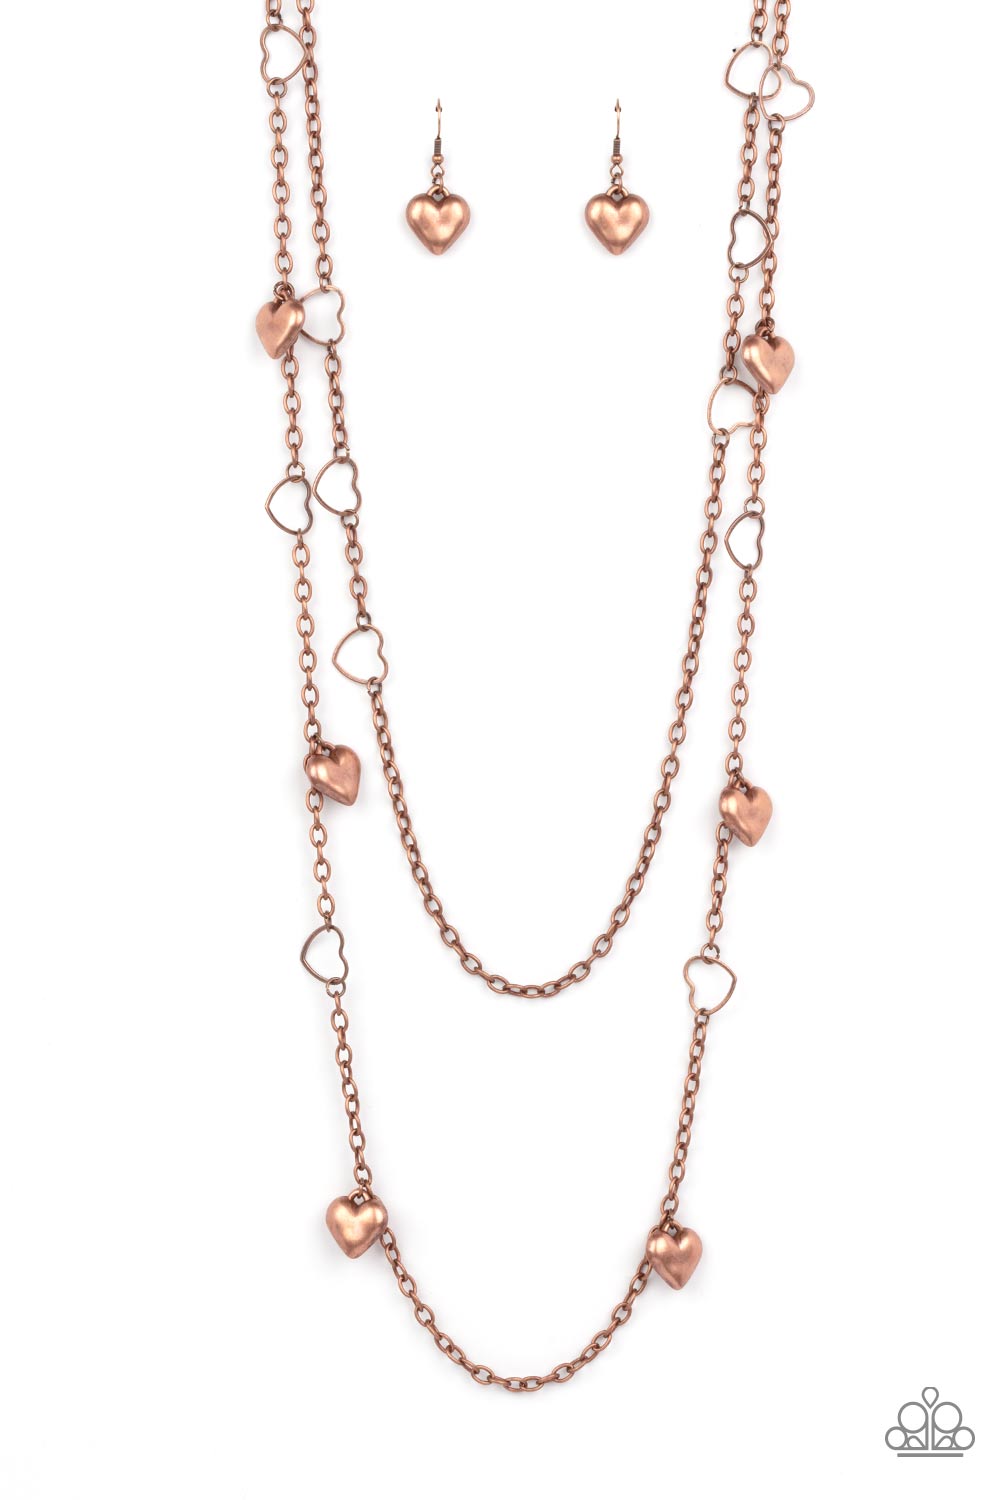 Chicly Cupid - copper - Paparazzi necklace